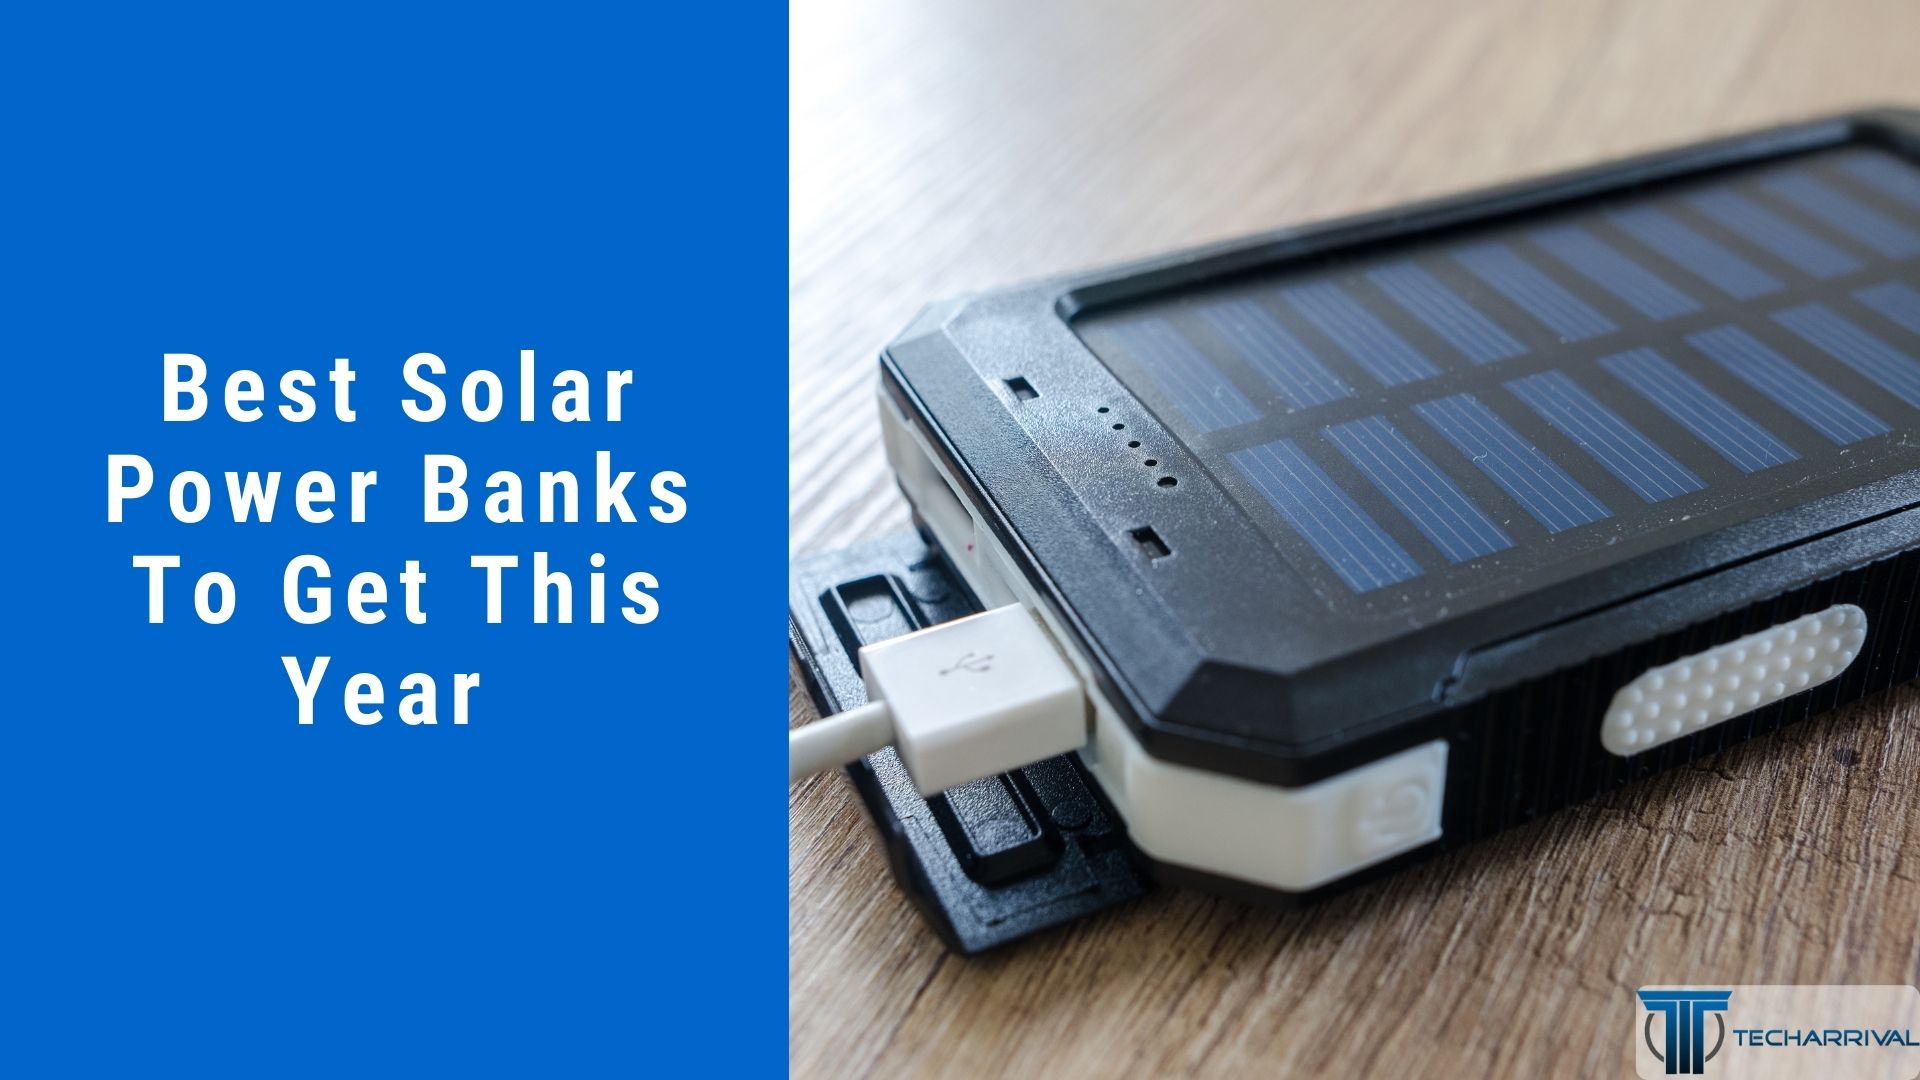 18 Best Solar Power Banks (May 2022)